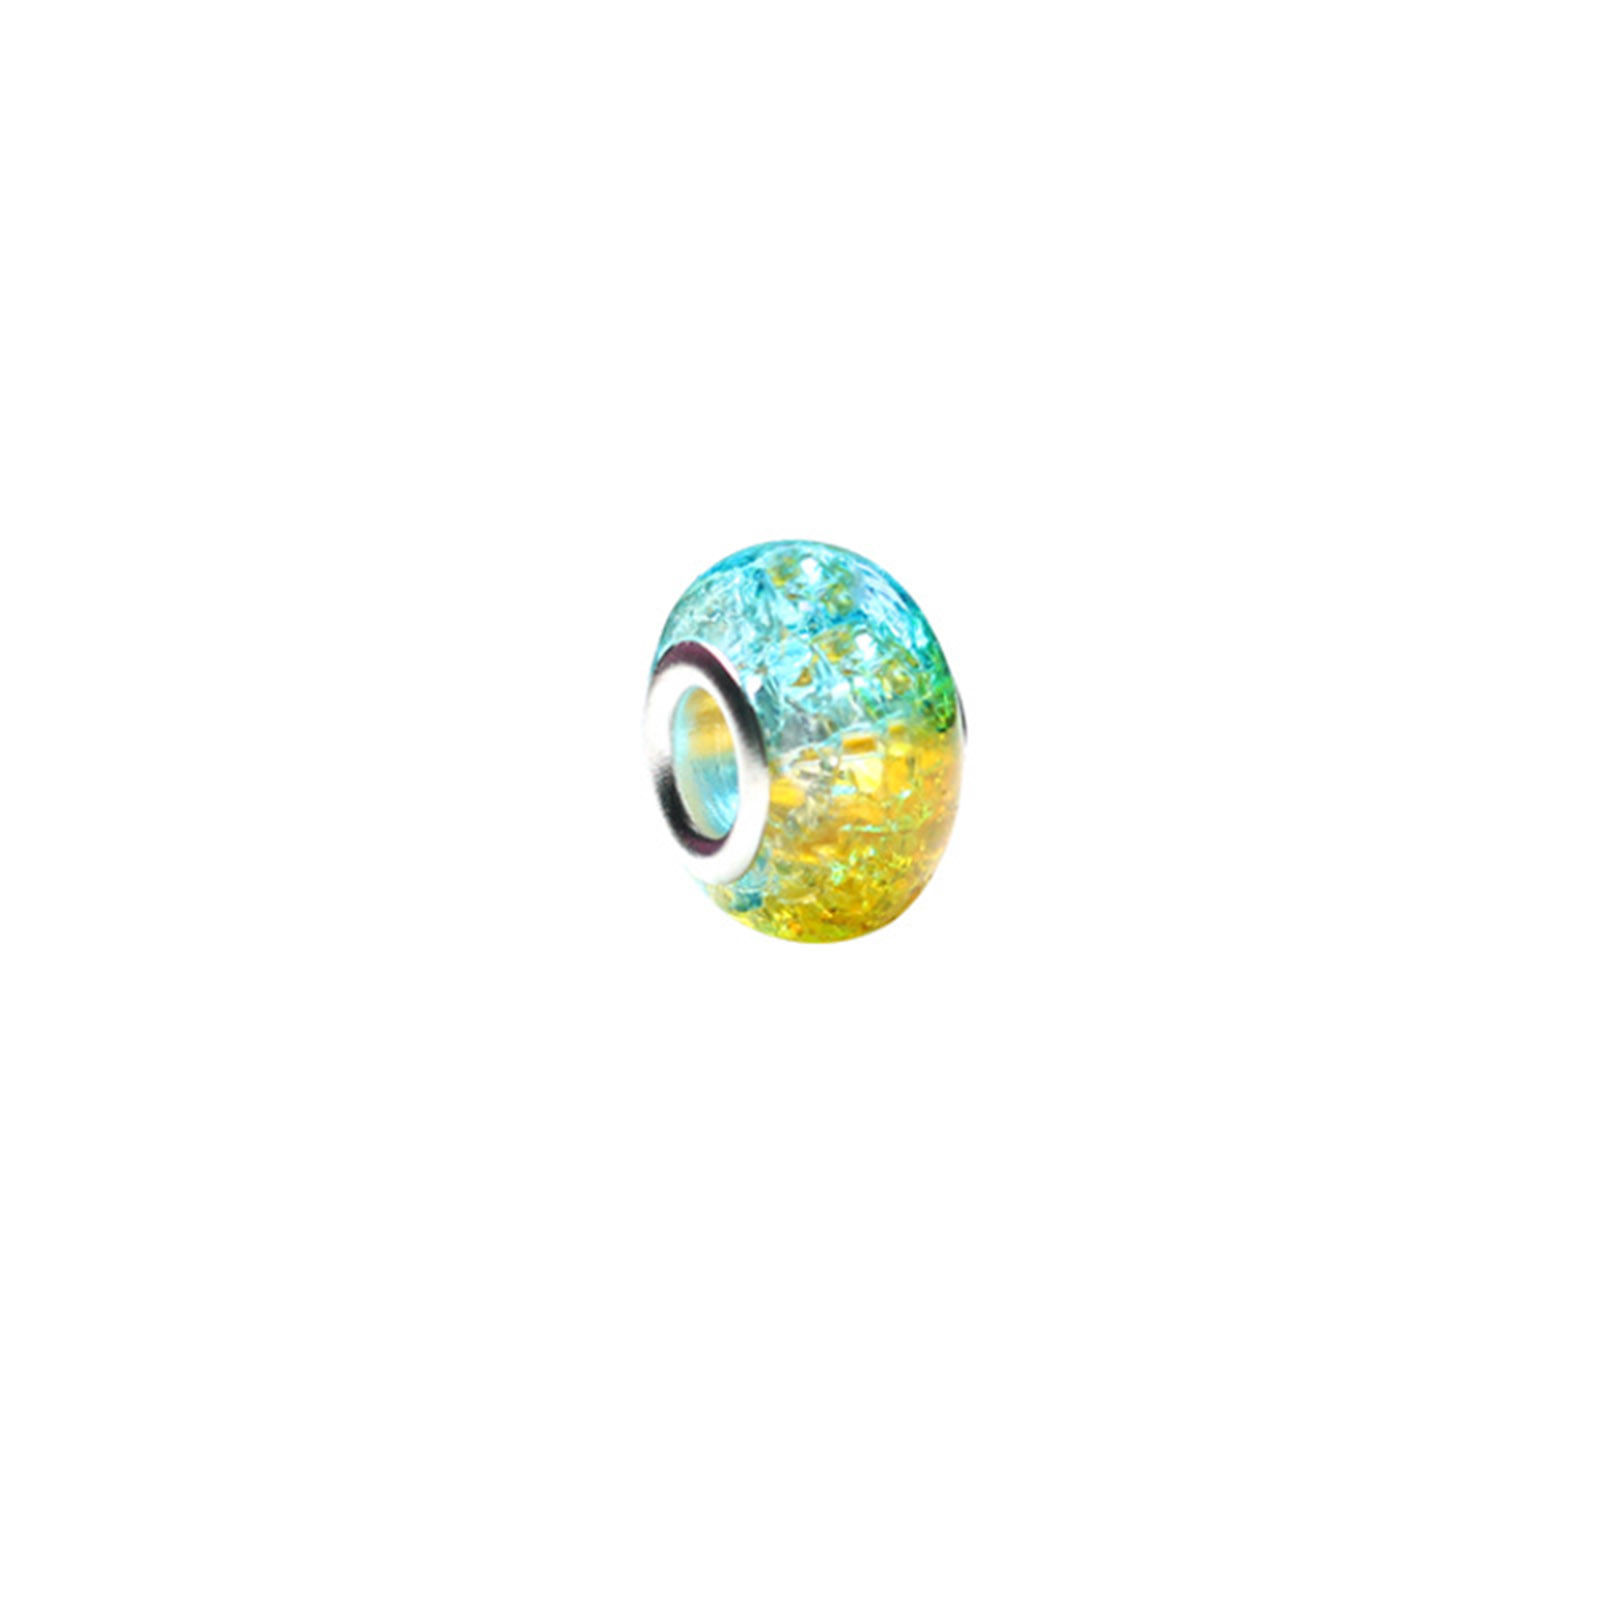 Picture of Resin European Style Large Hole Charm Beads Yellow & Blue Round Crack Gradient Color 14mm Dia., Hole: Approx 5mm, 20 PCs